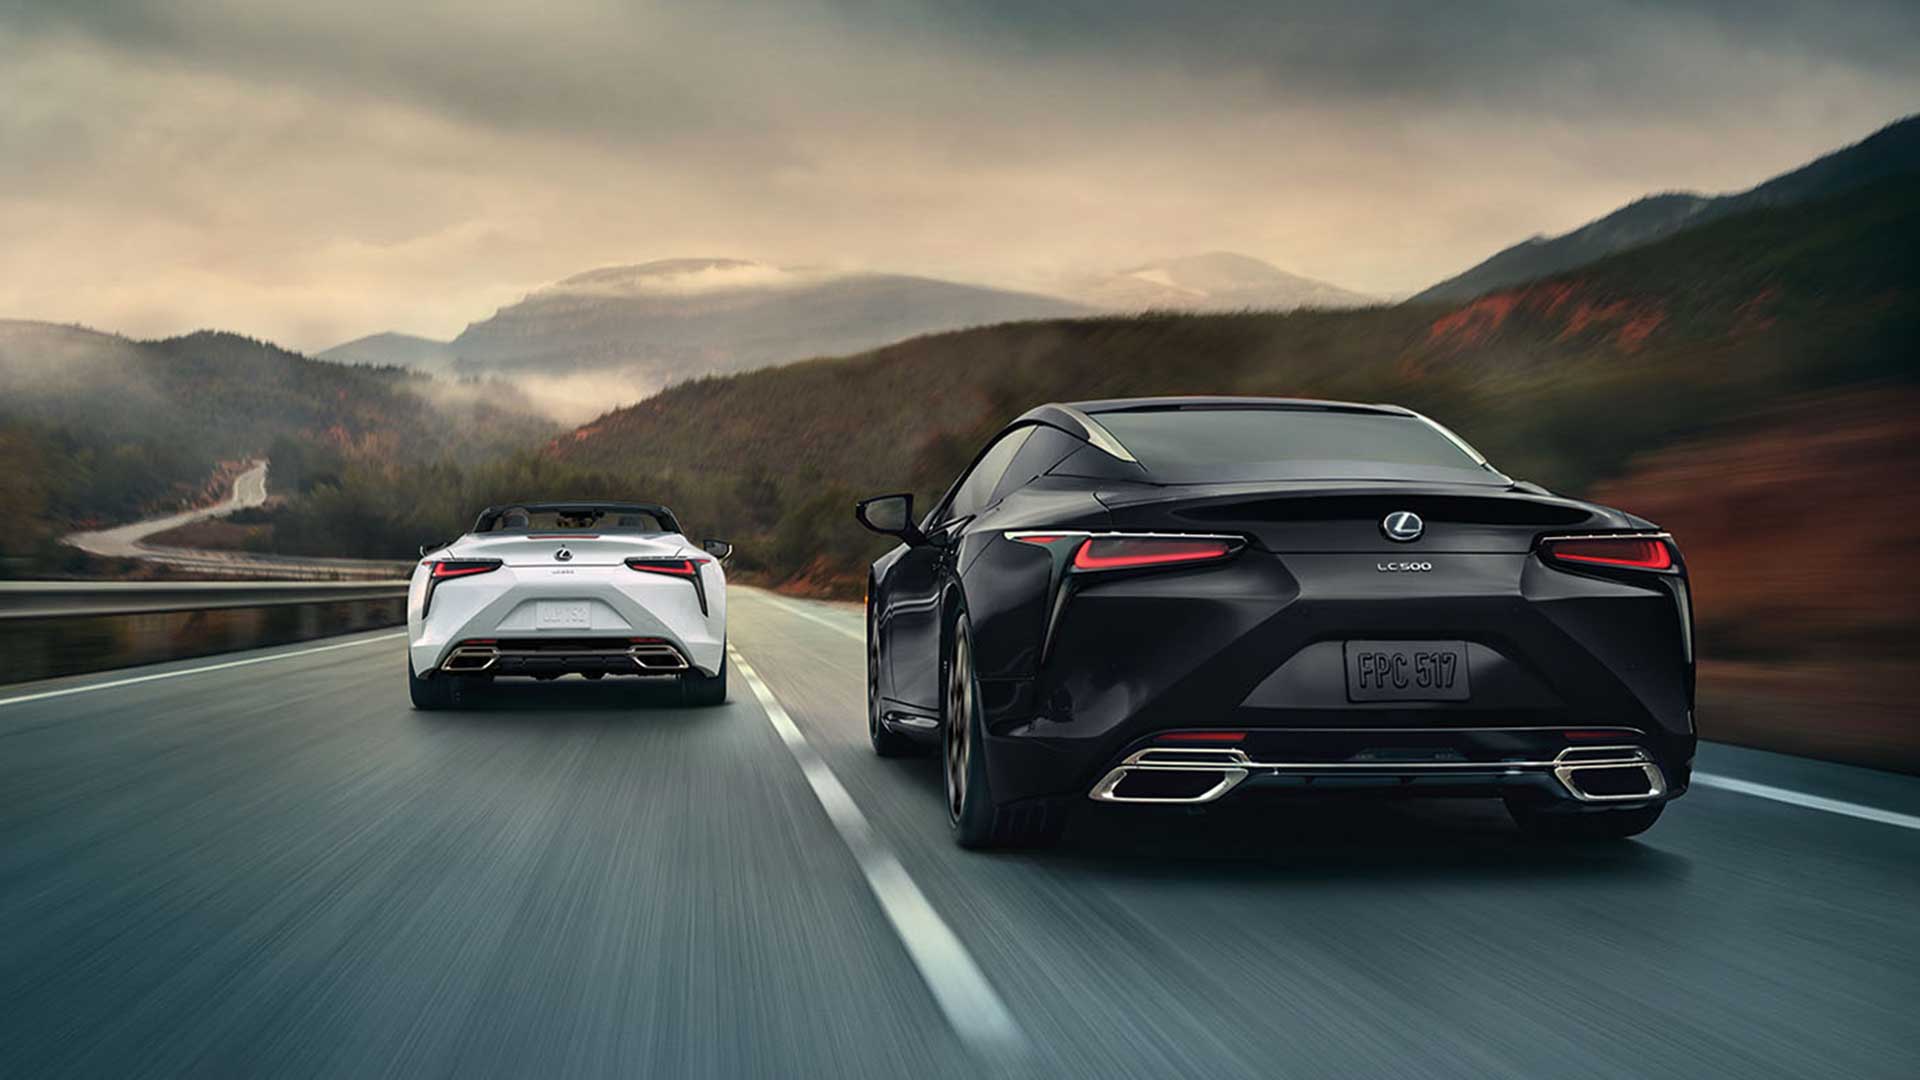 A white Lexus LC 500 Convertible drives alongside a black Lexus LC 500 coupe. They are both shown from the rear. The winding road into the mountains can be seen in the distance.